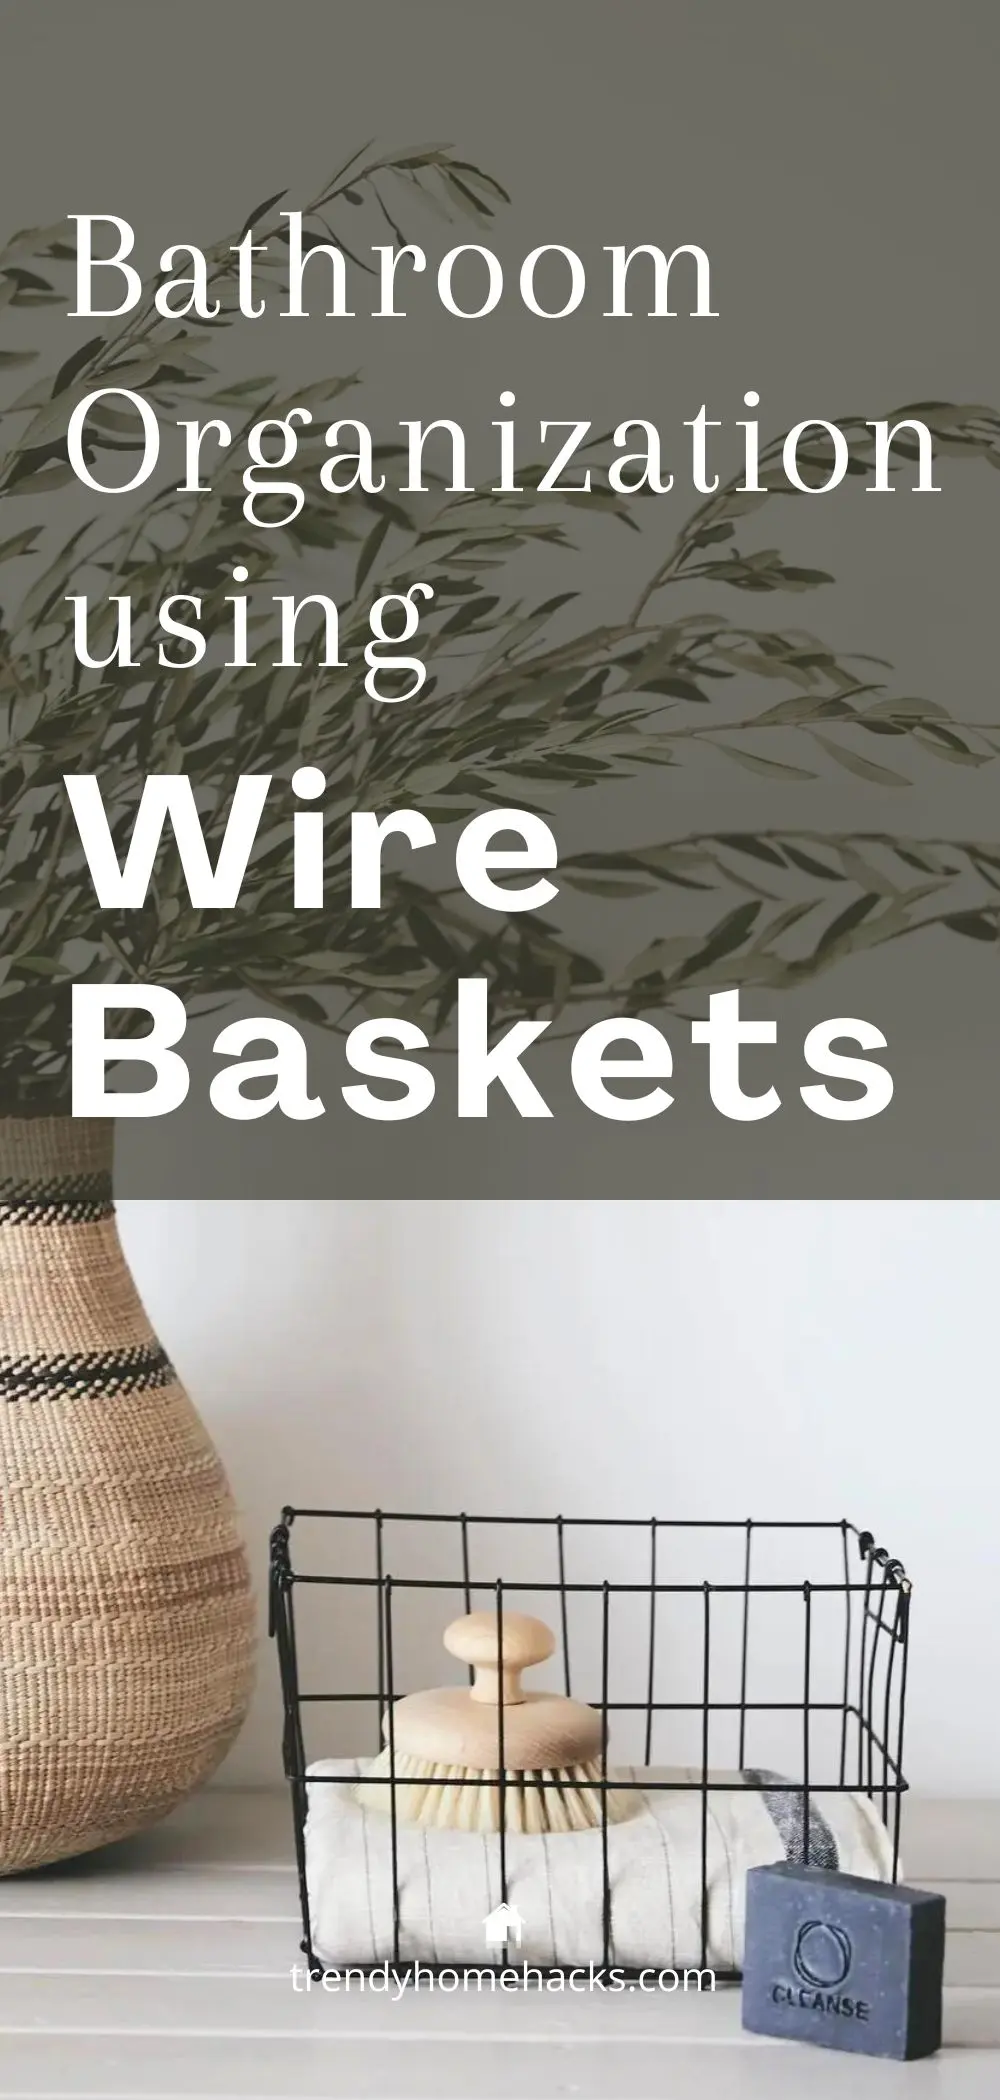 Pinterest image with text overlay "Bathroom Organization using Wire Basket".